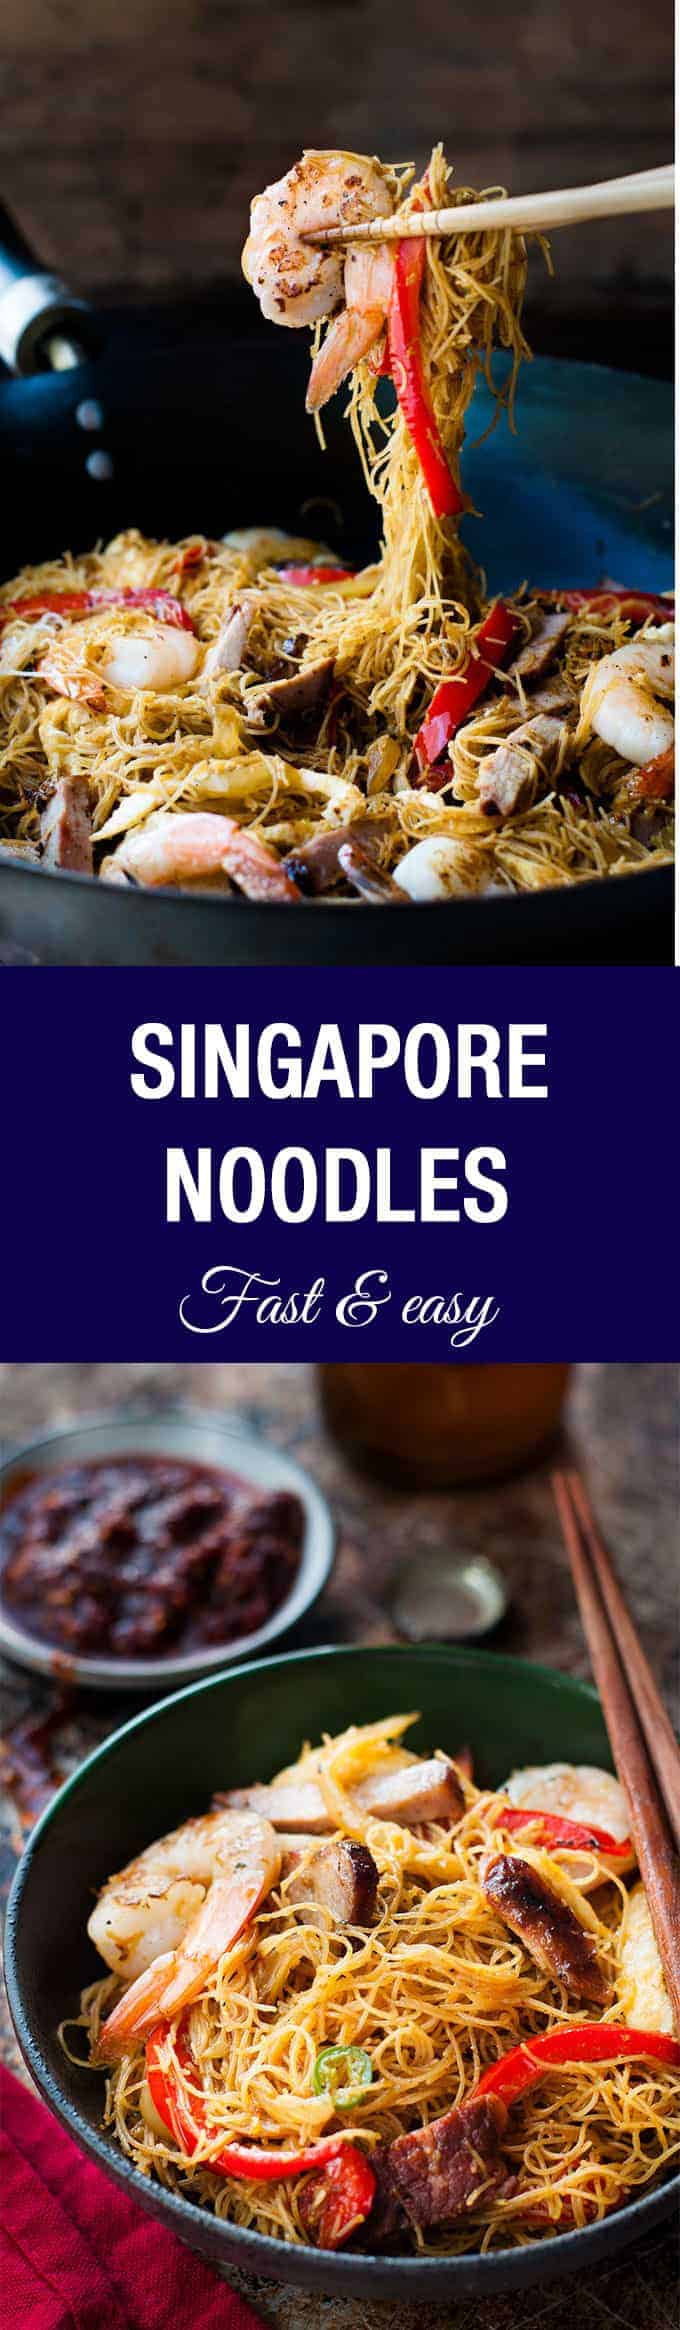 Singapore Noodles - fast and easy to make, use whatever meat and veg you have on hand!